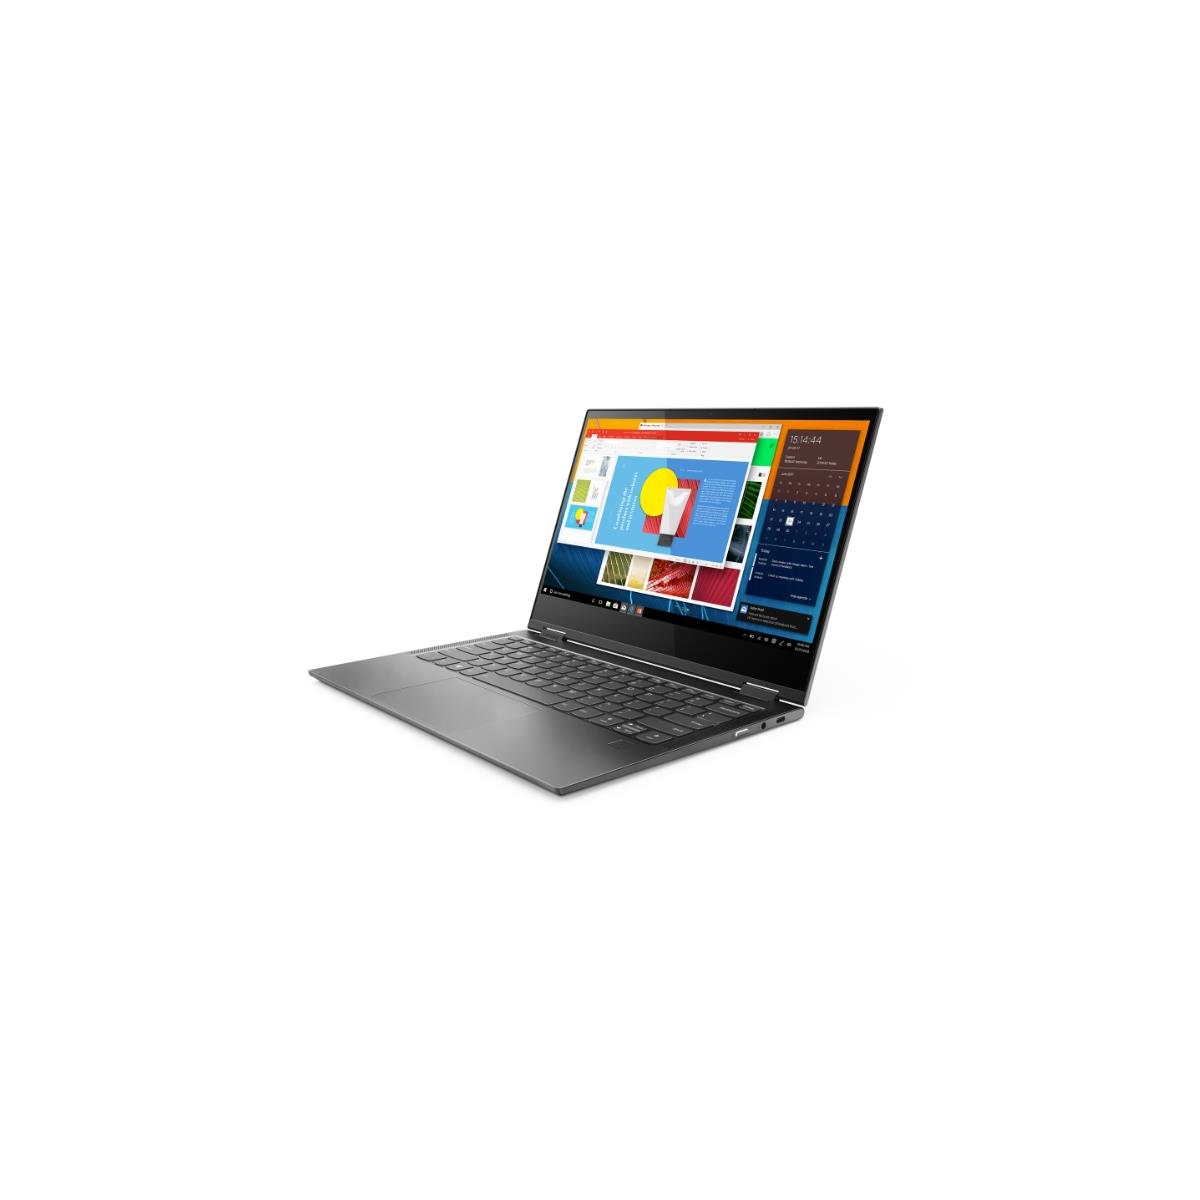 Lenovo Miix 630 ARM-based 2-in-1 Windows tablet goes on sale for